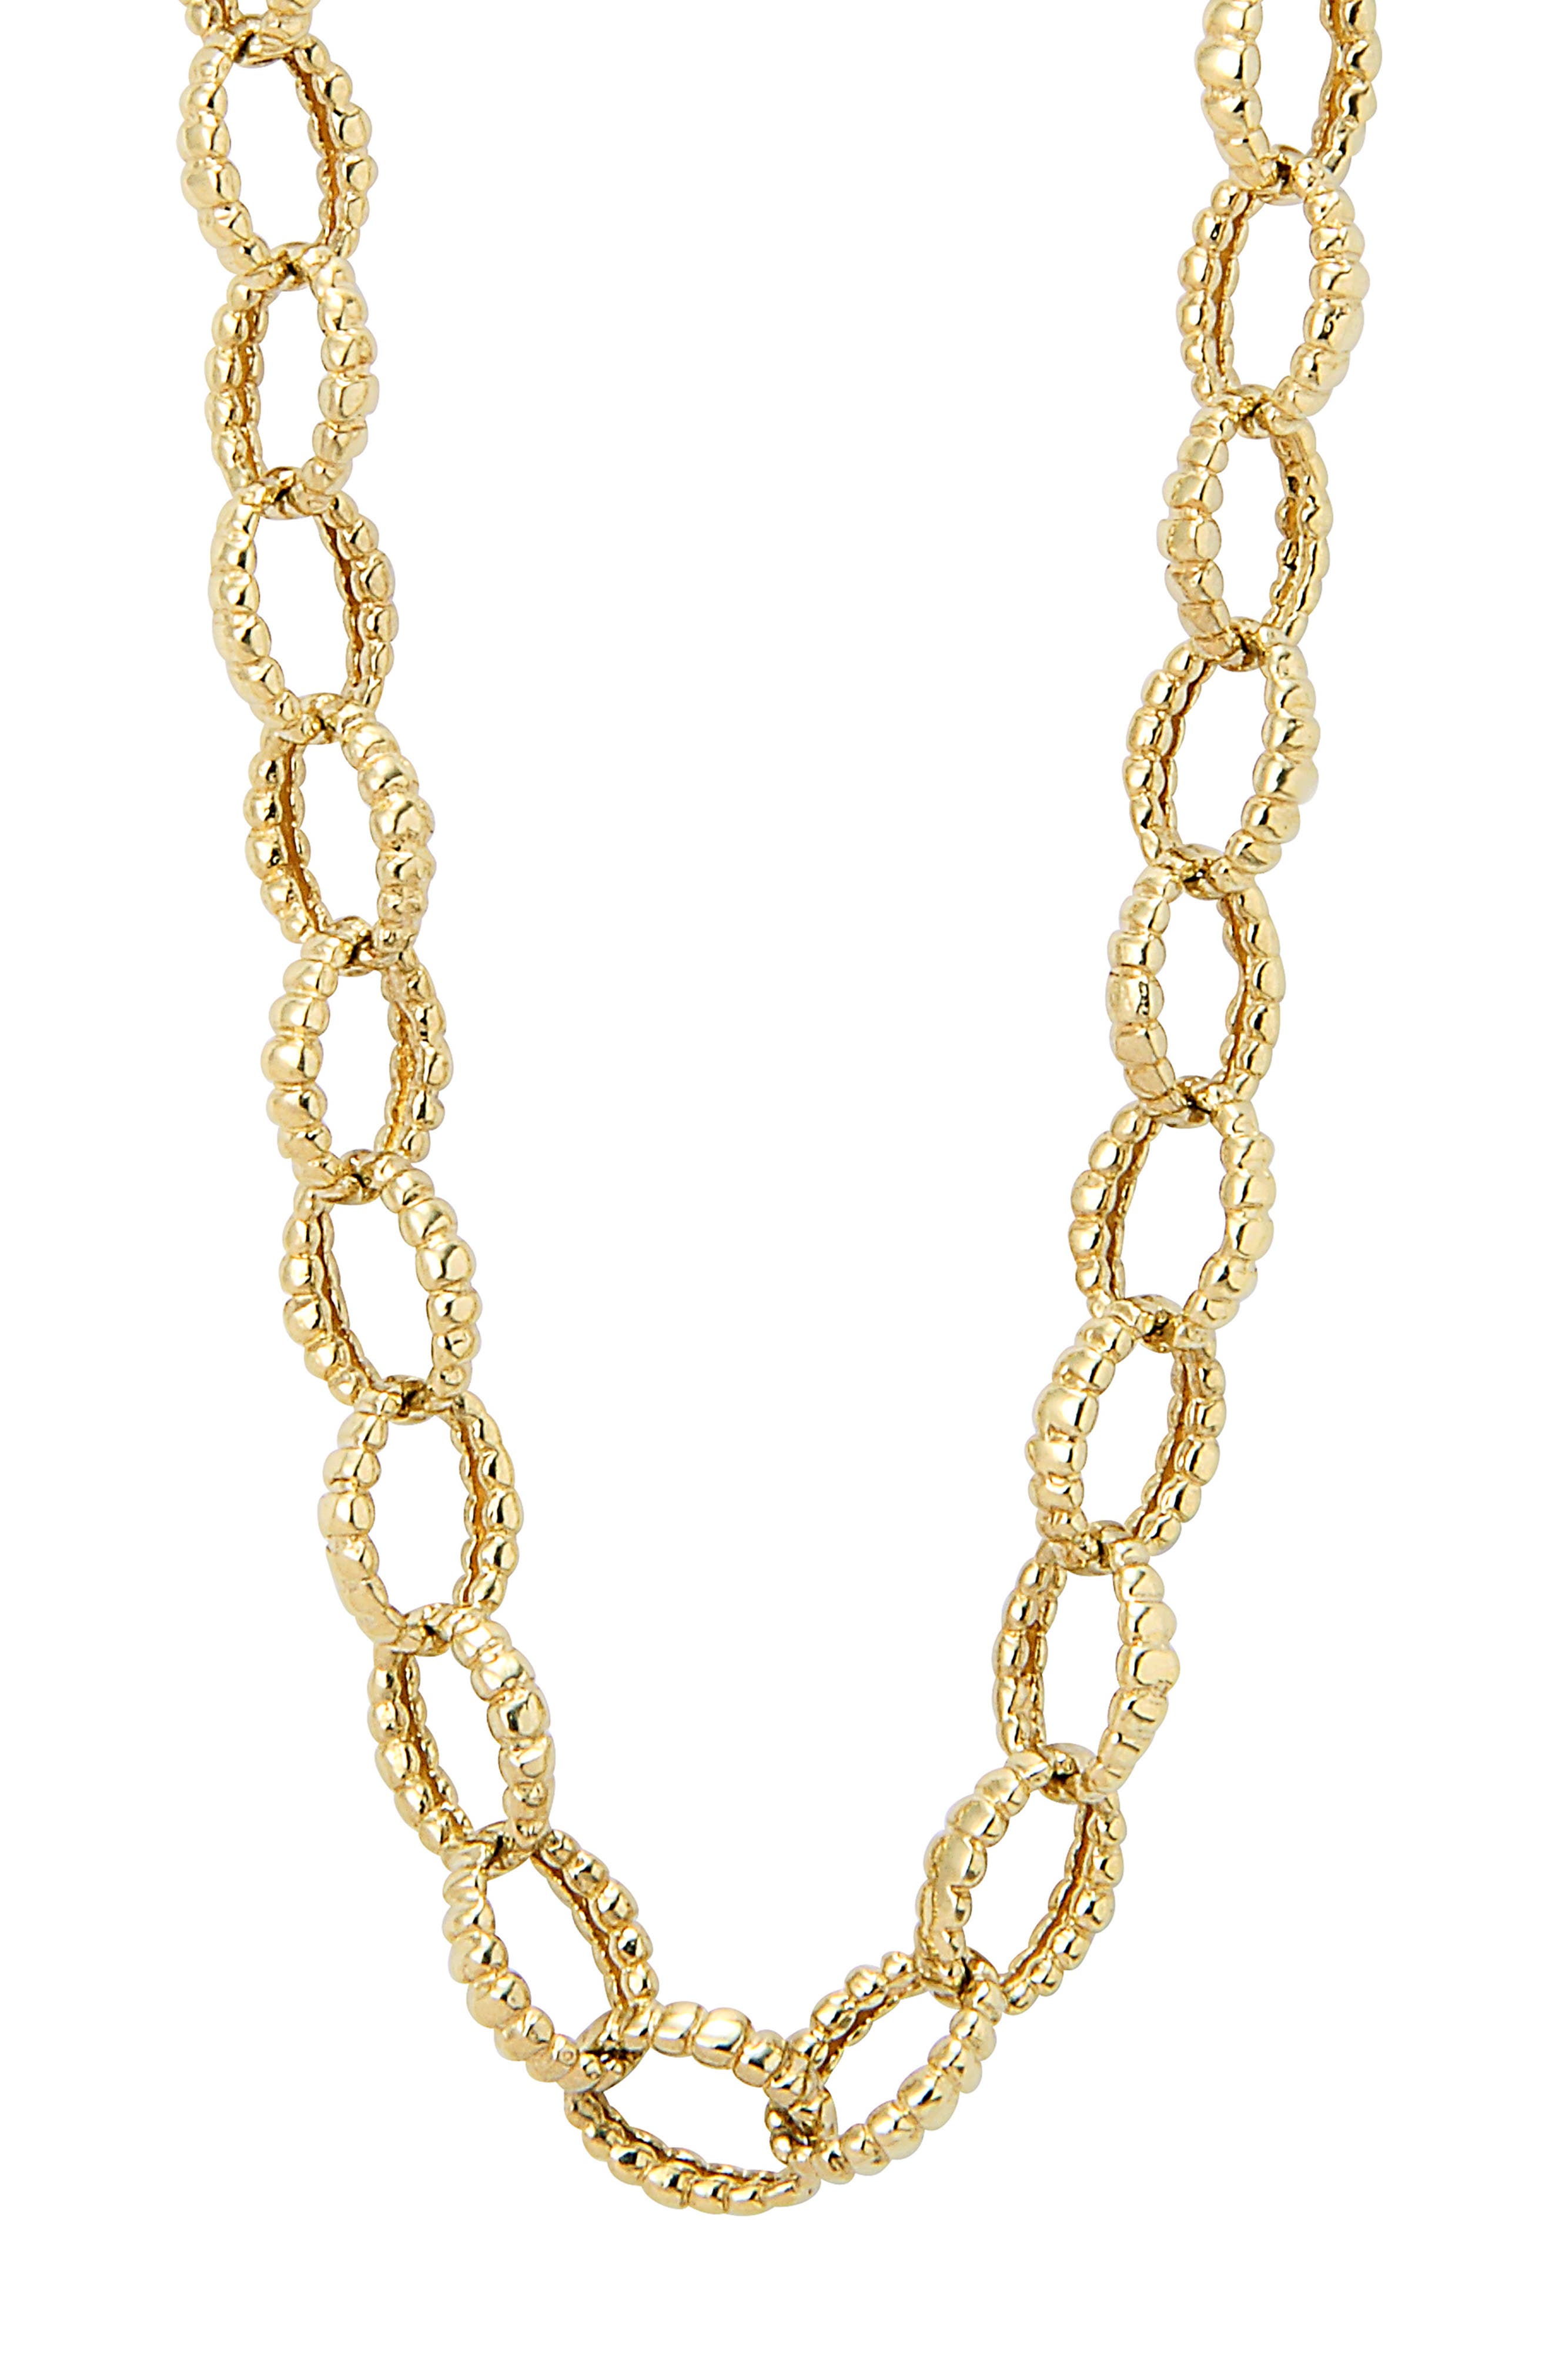 Lux Accessories Pave LOVE Multi Row Chain Word Necklace.